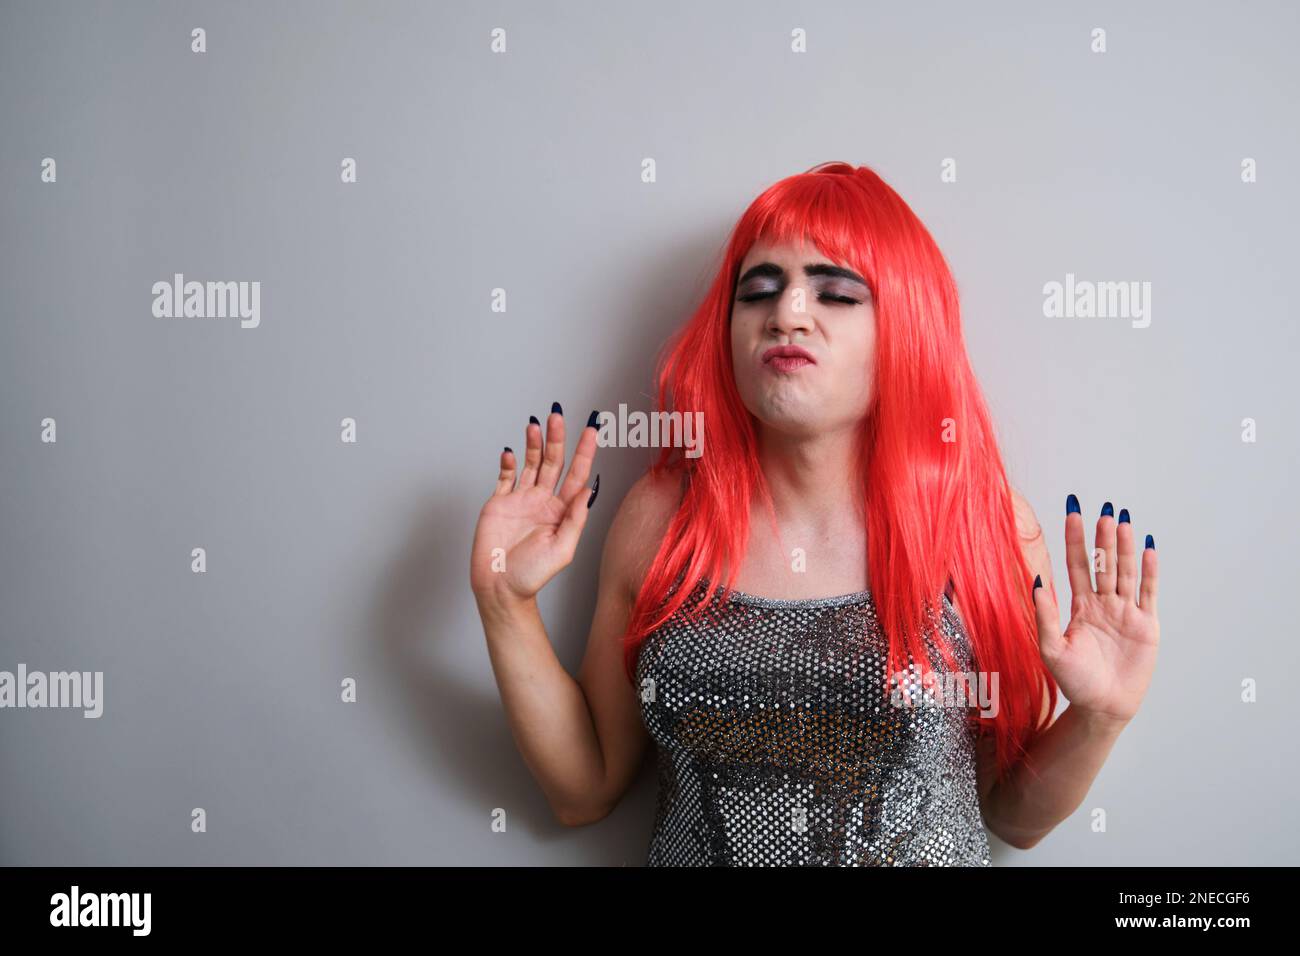 Portrait of transgender man dancing and wearing a red wig. Stock Photo